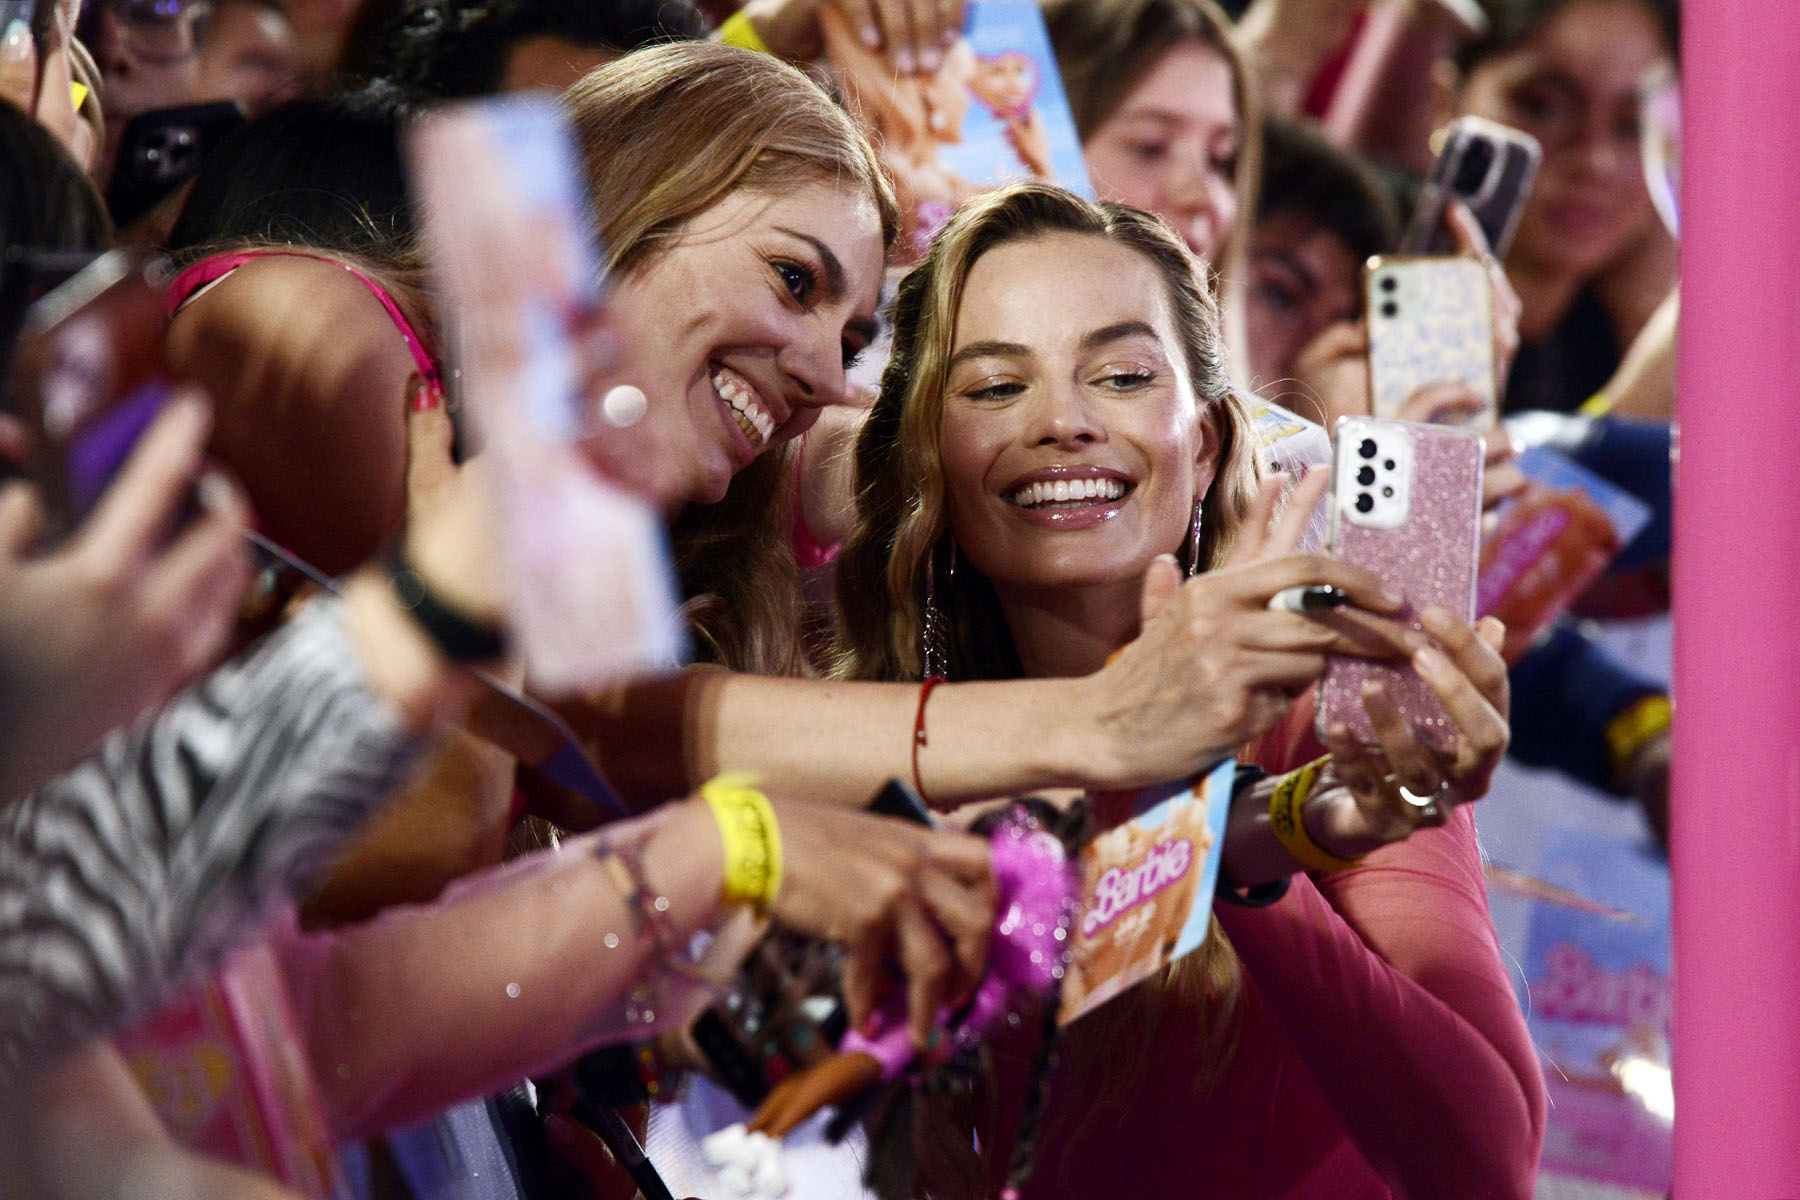 Margot Robbie takes selfies with fans at the Mexico City Barbie movie premiere.